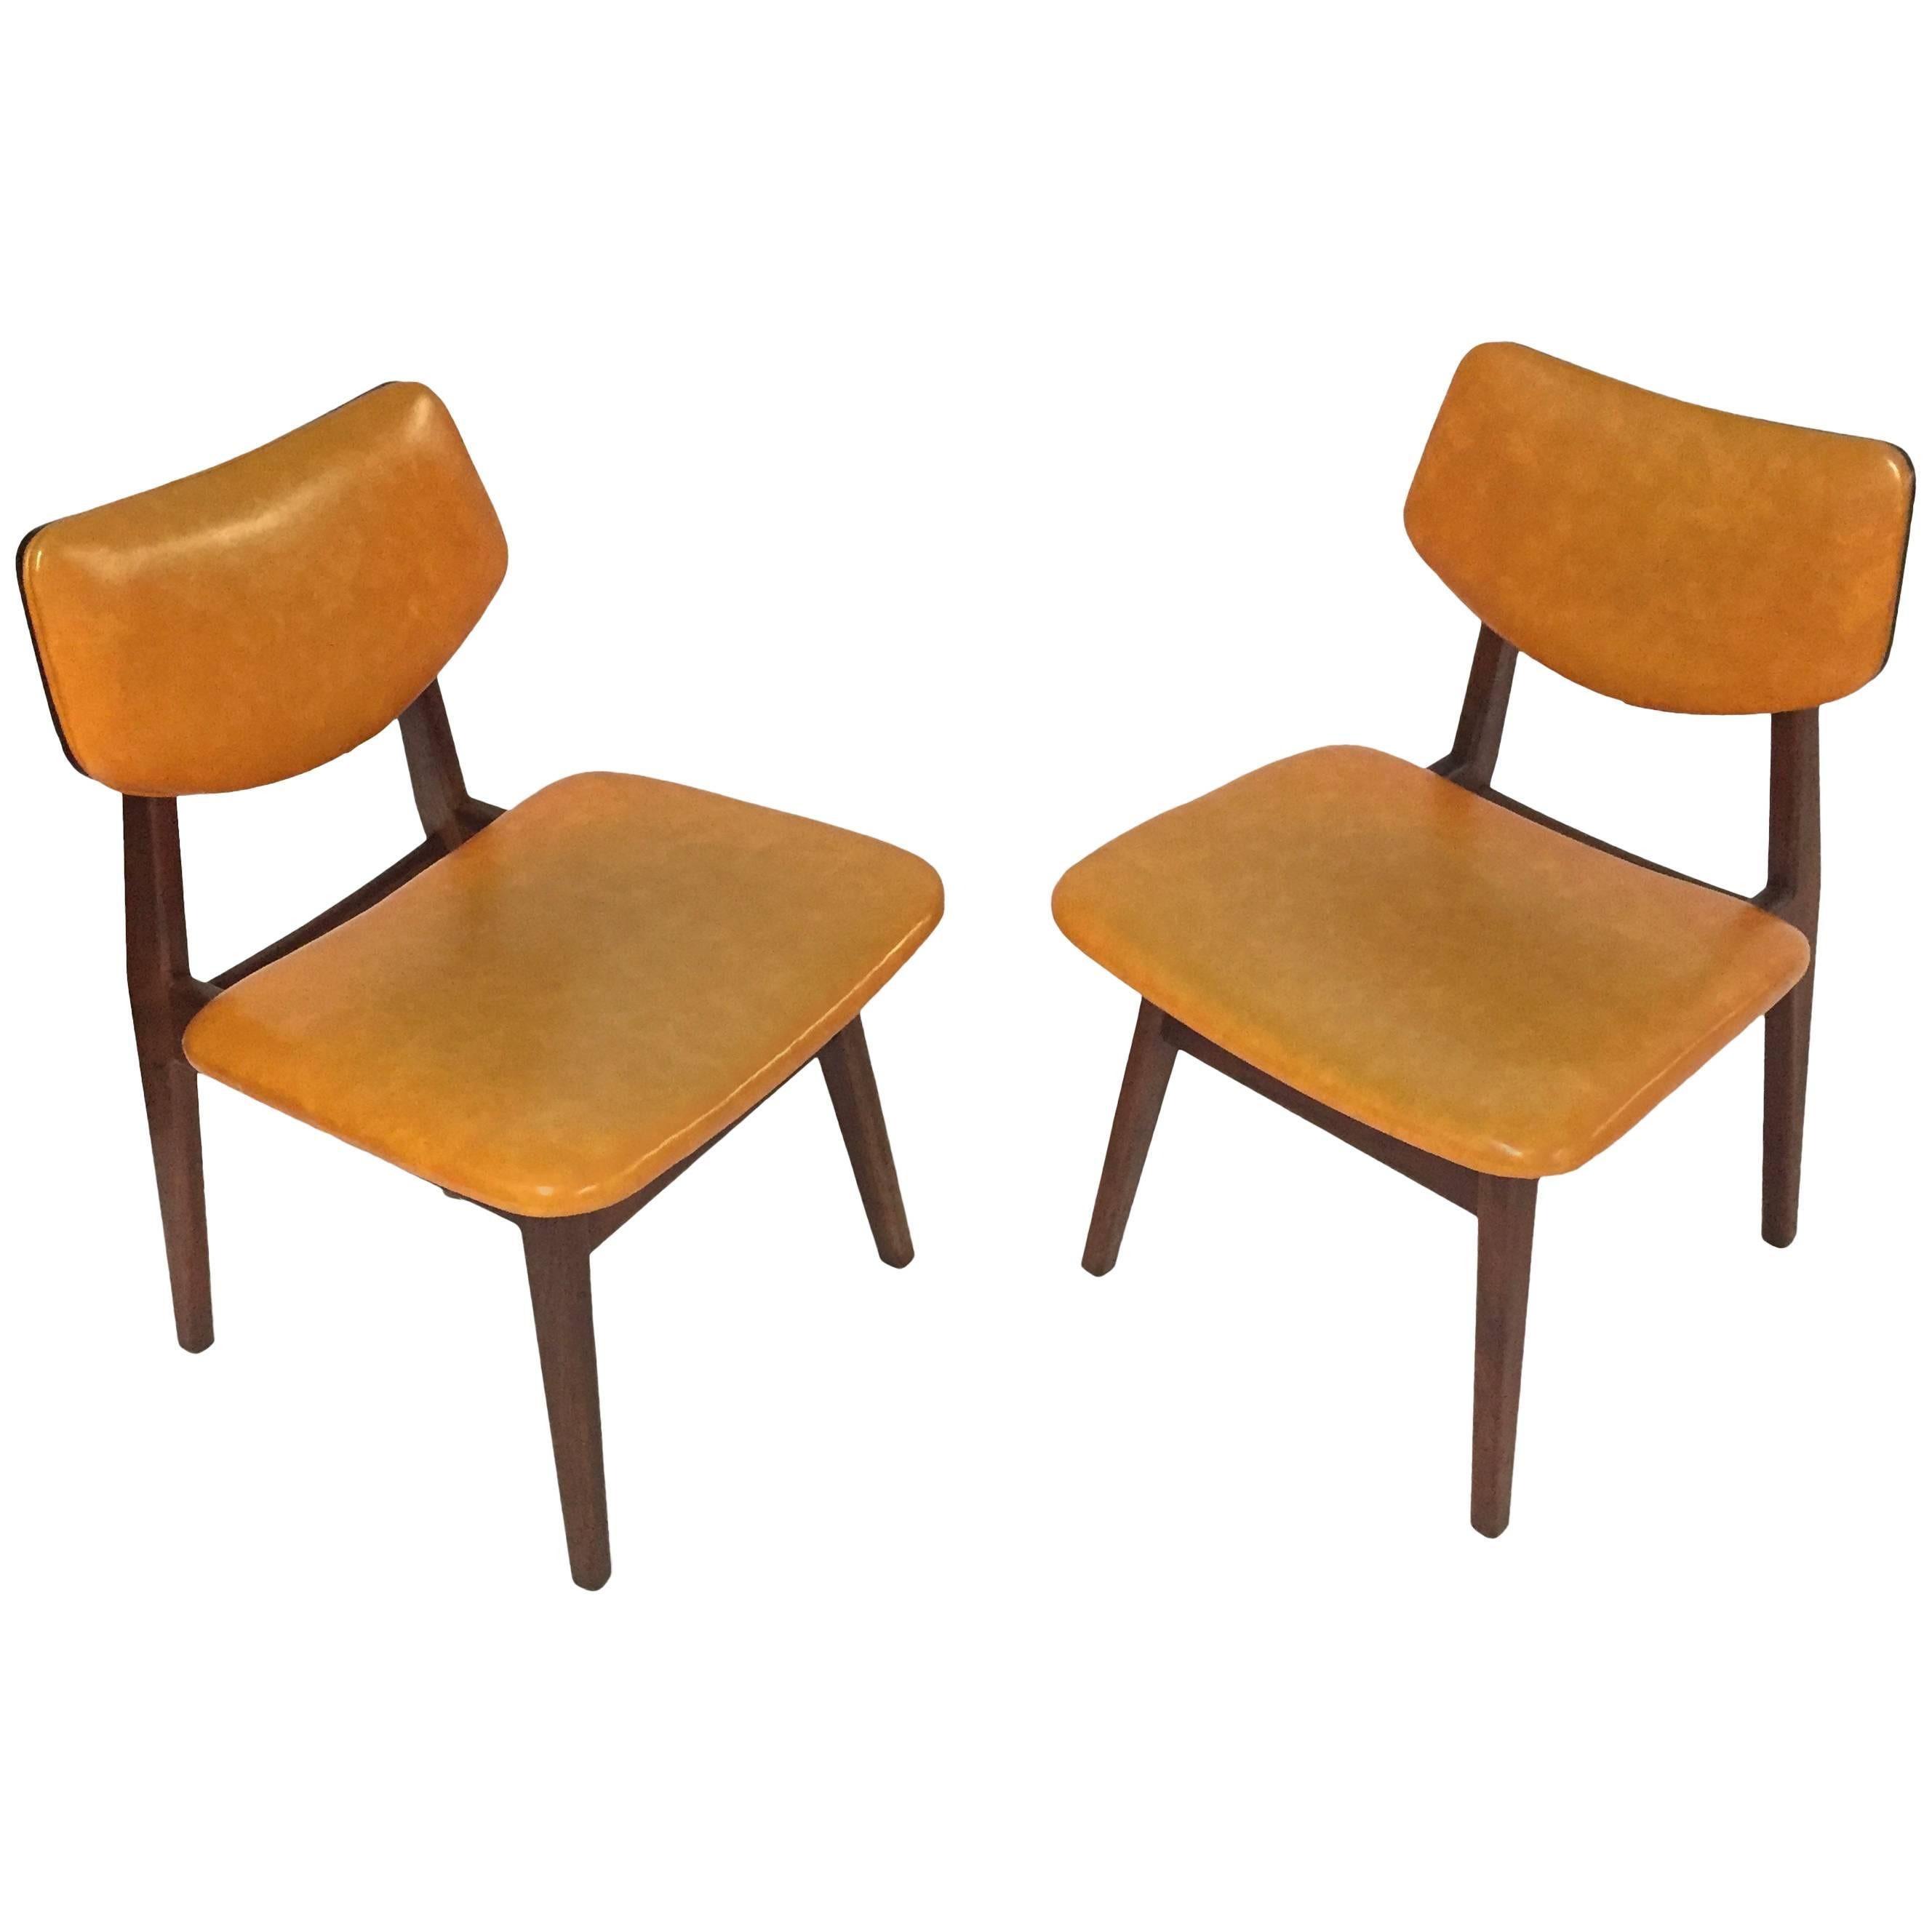 Pair of Early Jens Risom Chairs in Original Vinyl, circa 1950, Made in America